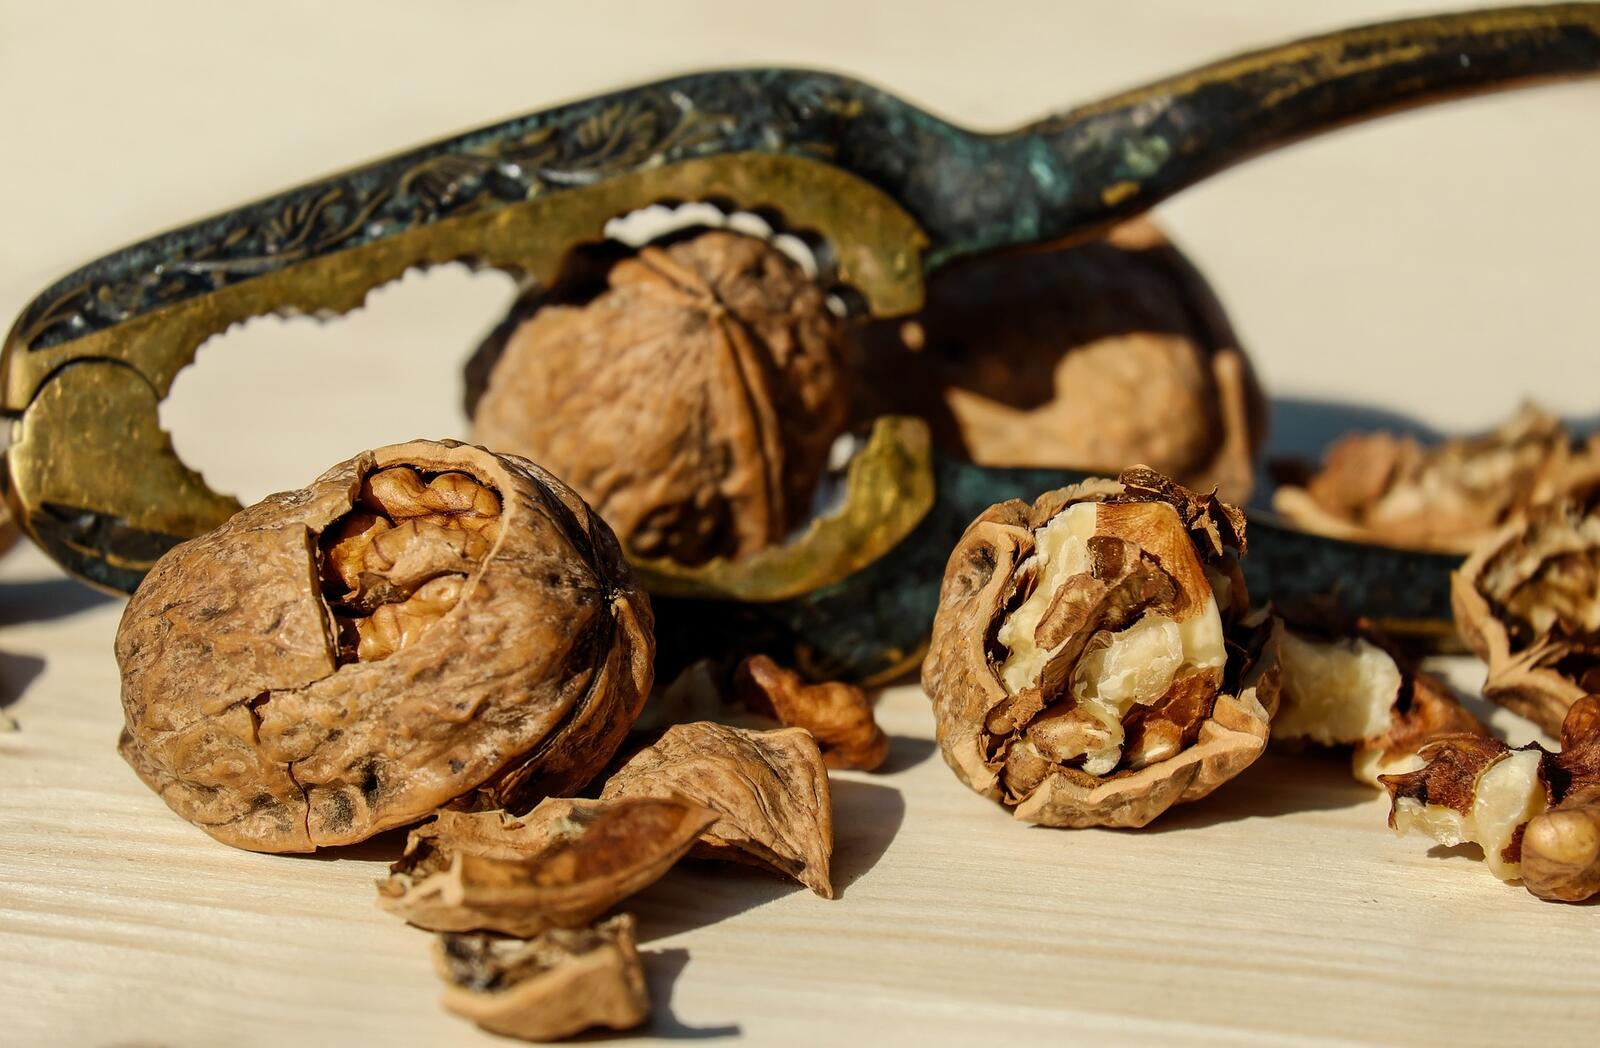 Wallpapers walnuts fruits snack on the desktop